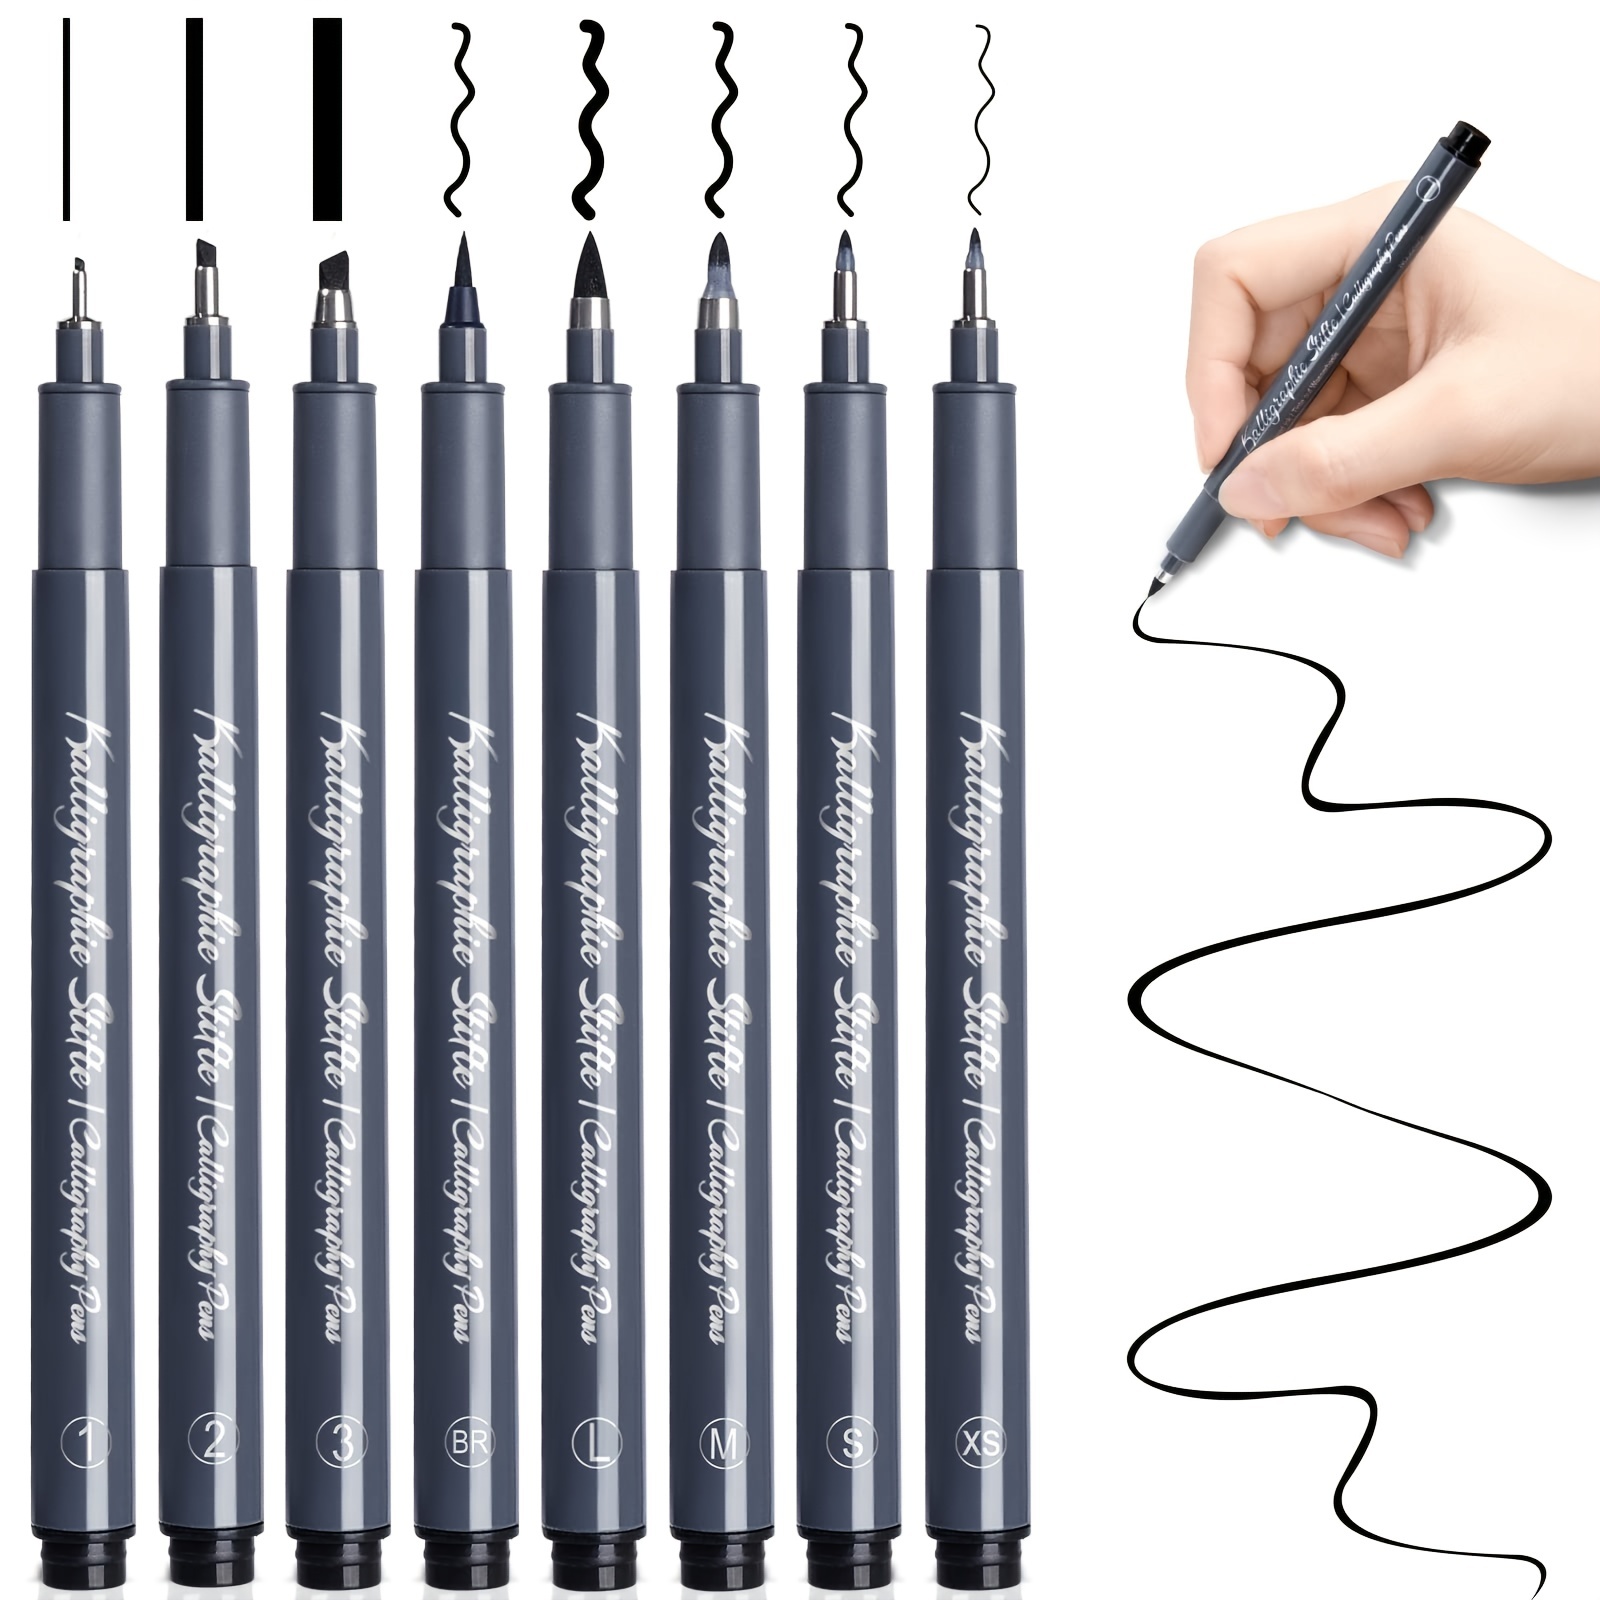 Caligraphy Pens For Caligraphy Beginners Set, 8 Size Calligraphy Pens Black  Brush Pens For Writing, Signature And Drawing